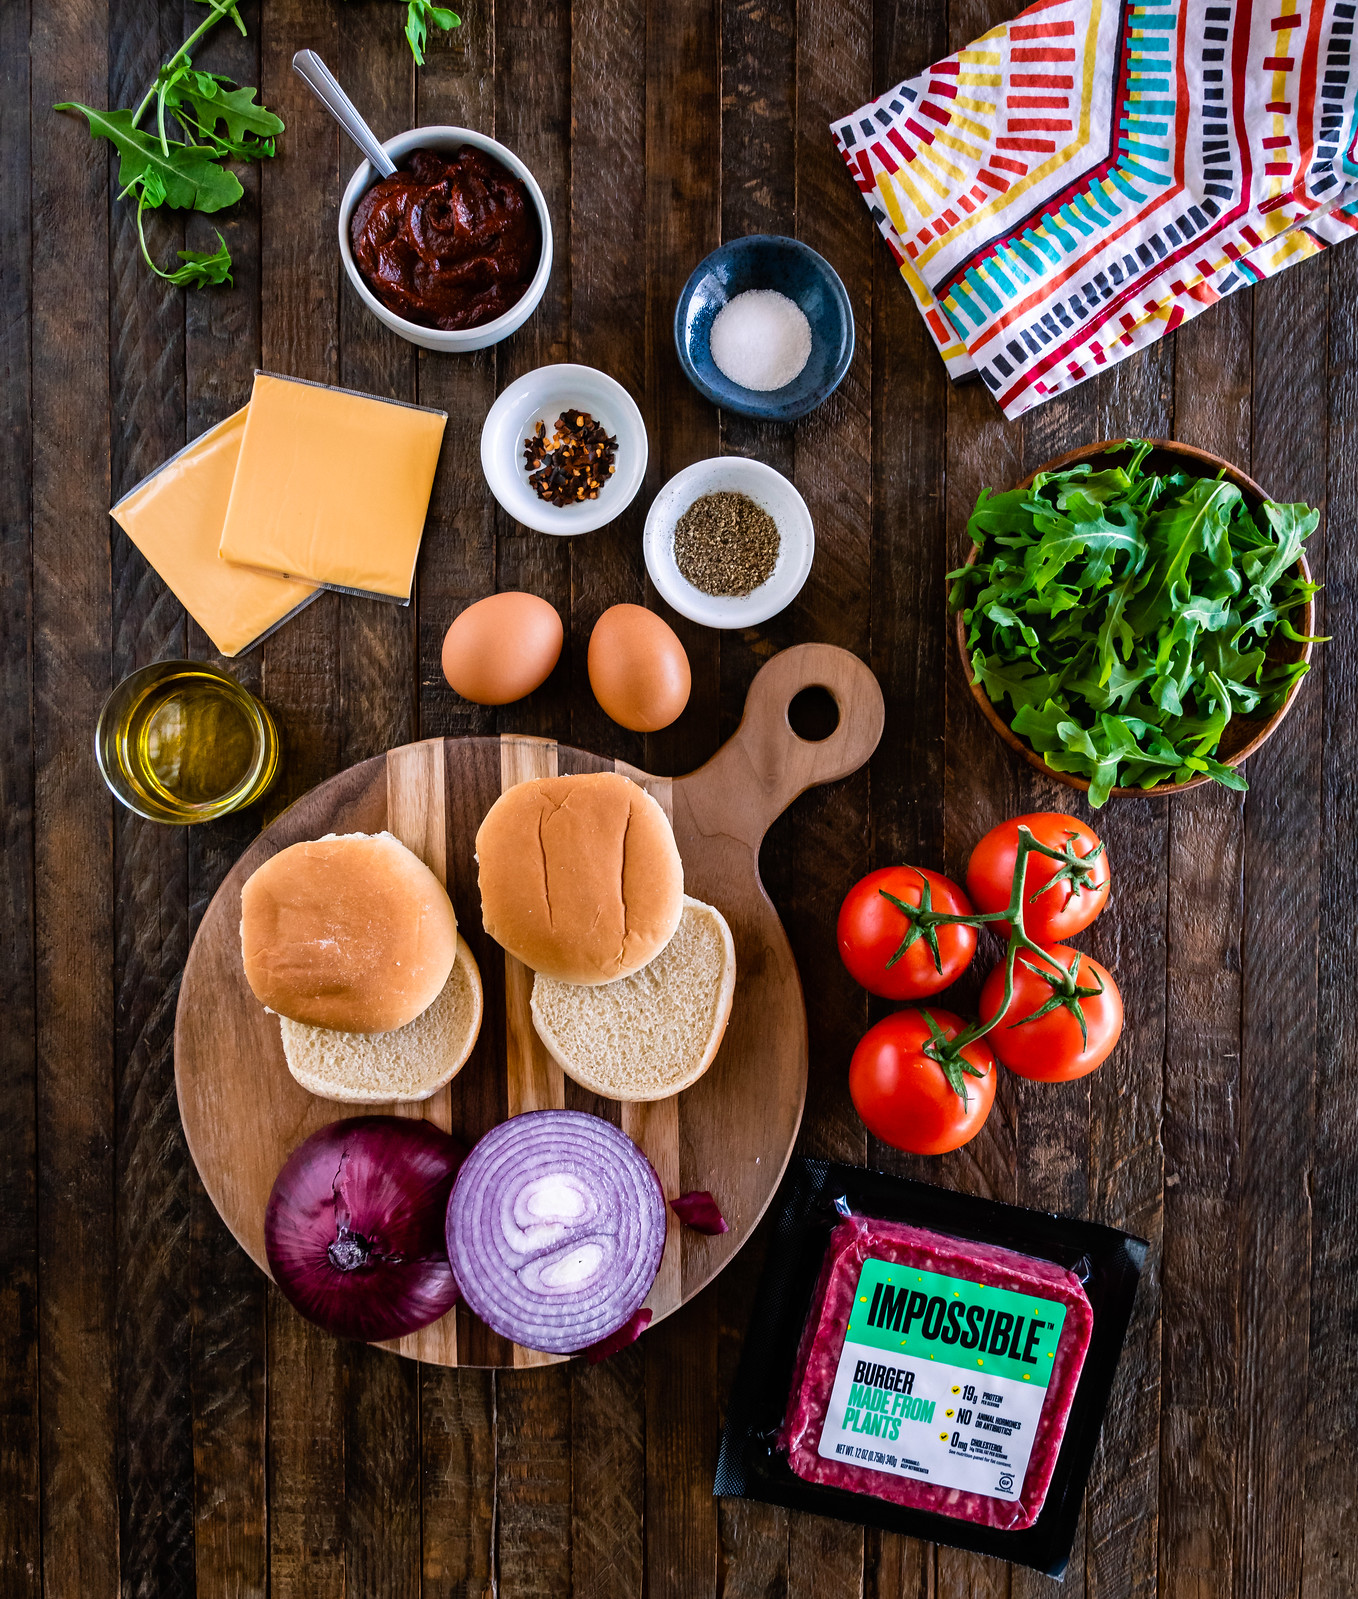 a spread of colorful ingredients to make impossible breakfast sliders